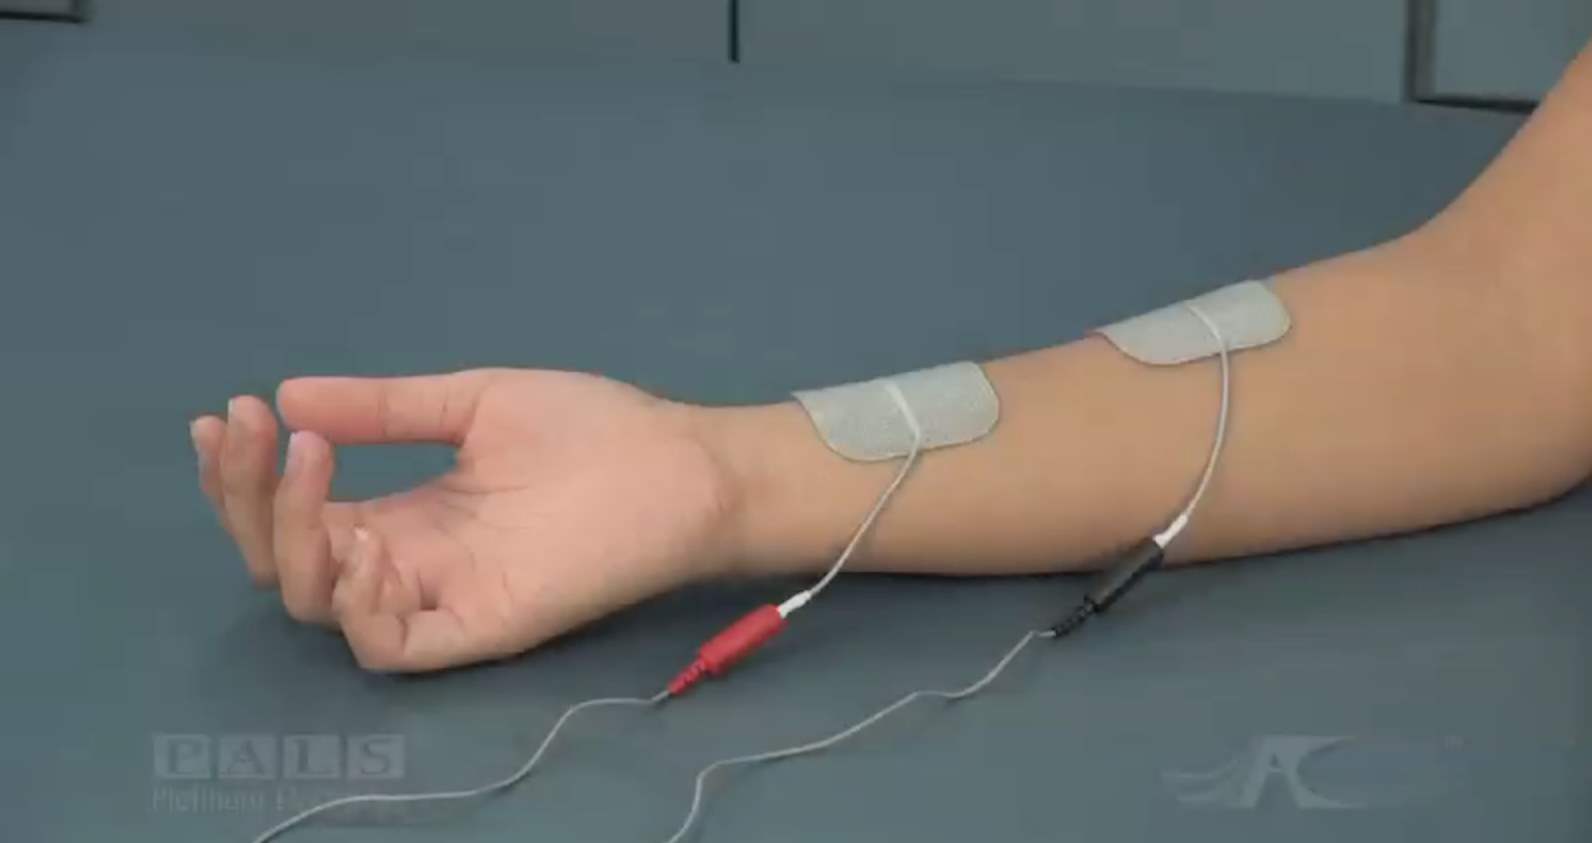 Guide to electrical stimulation therapy for stroke patients 